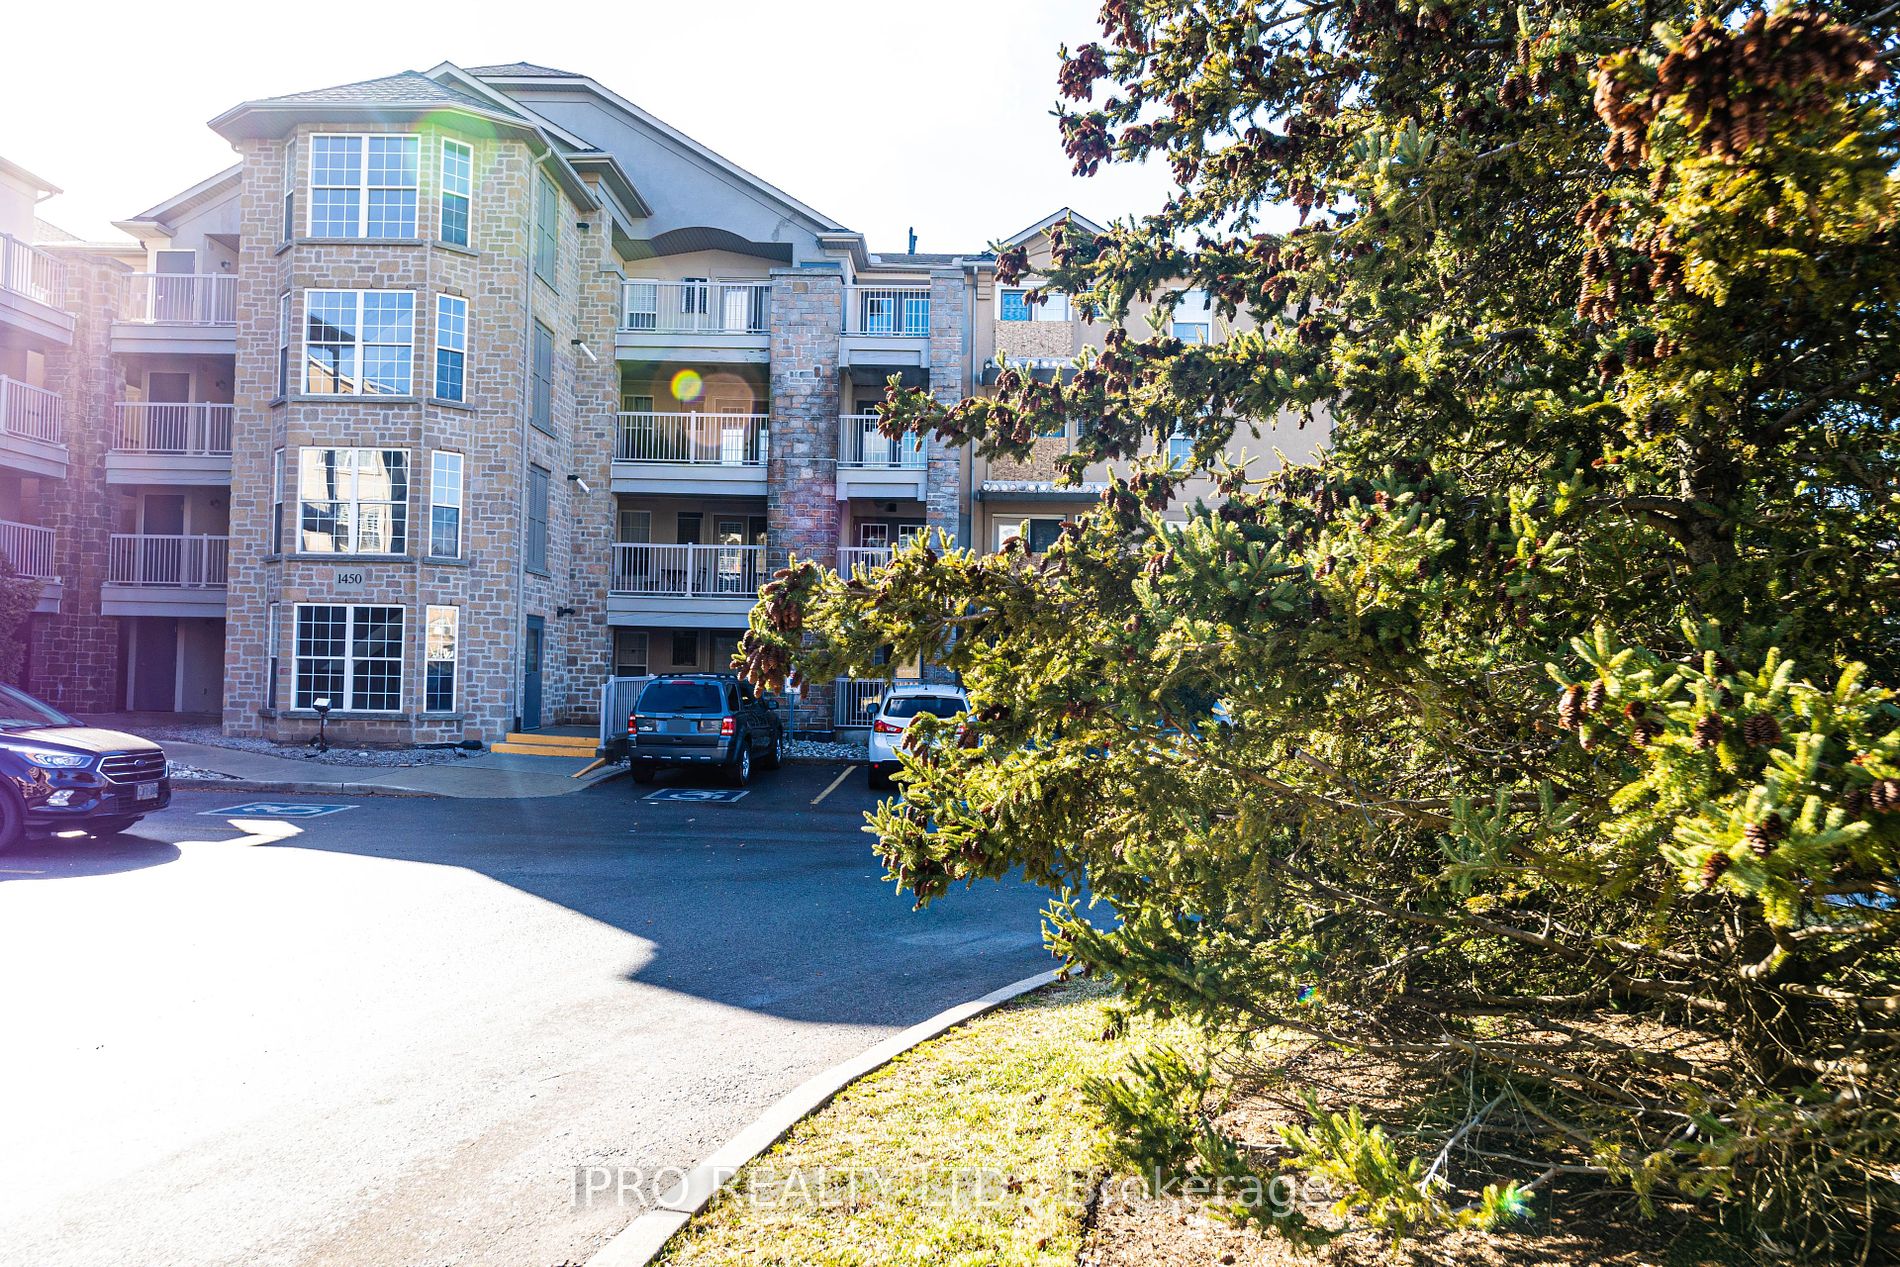 Condo Apt house for sale at 1450 Bishops Gat Oakville Ontario